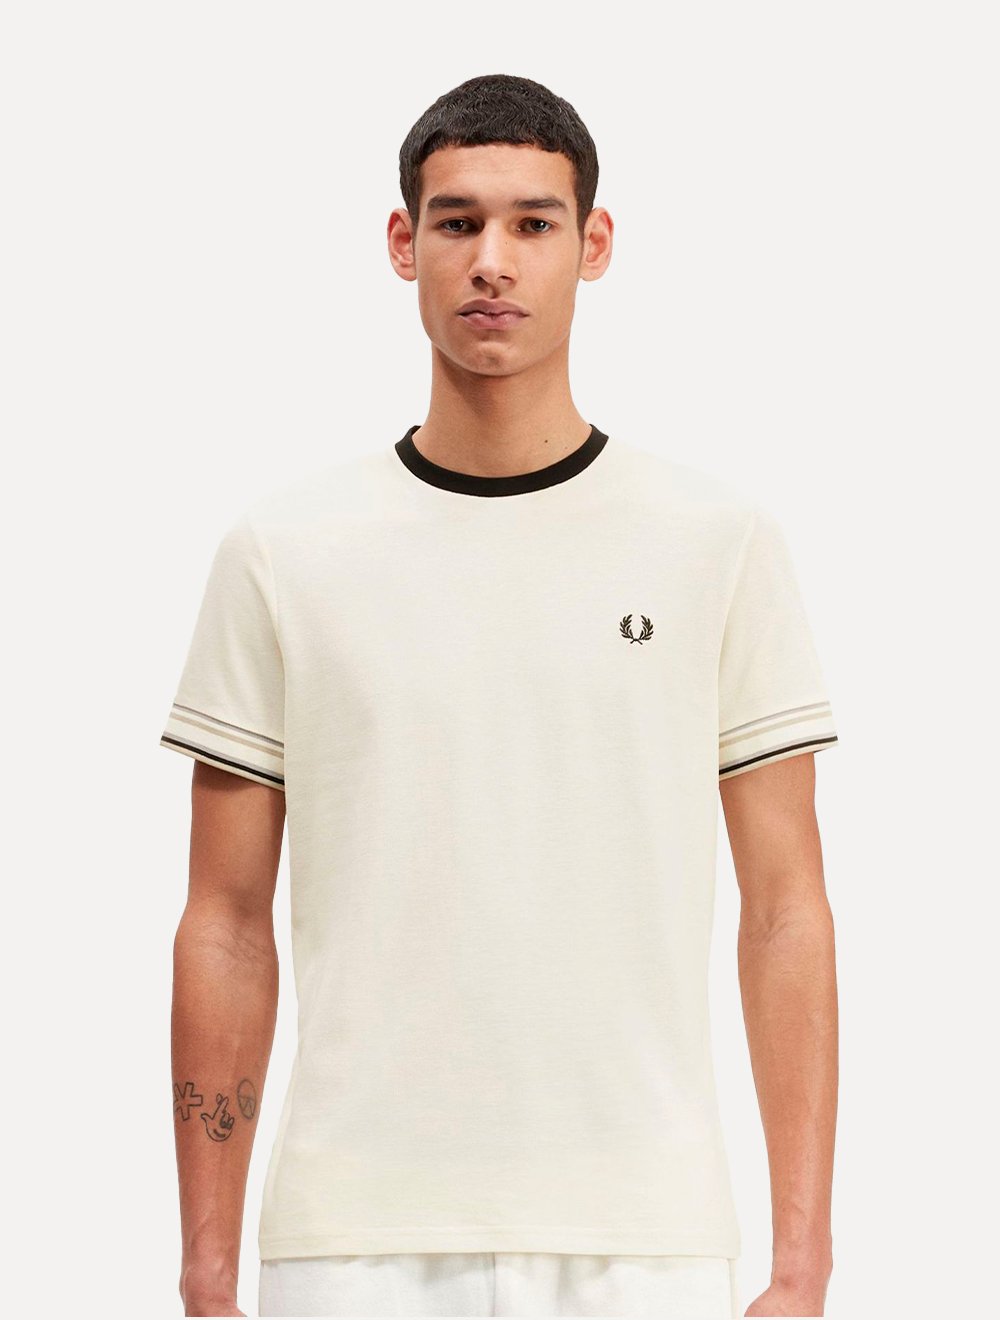 Camiseta Fred Perry Masculina Regular Piquet Bold Tipped Off-White